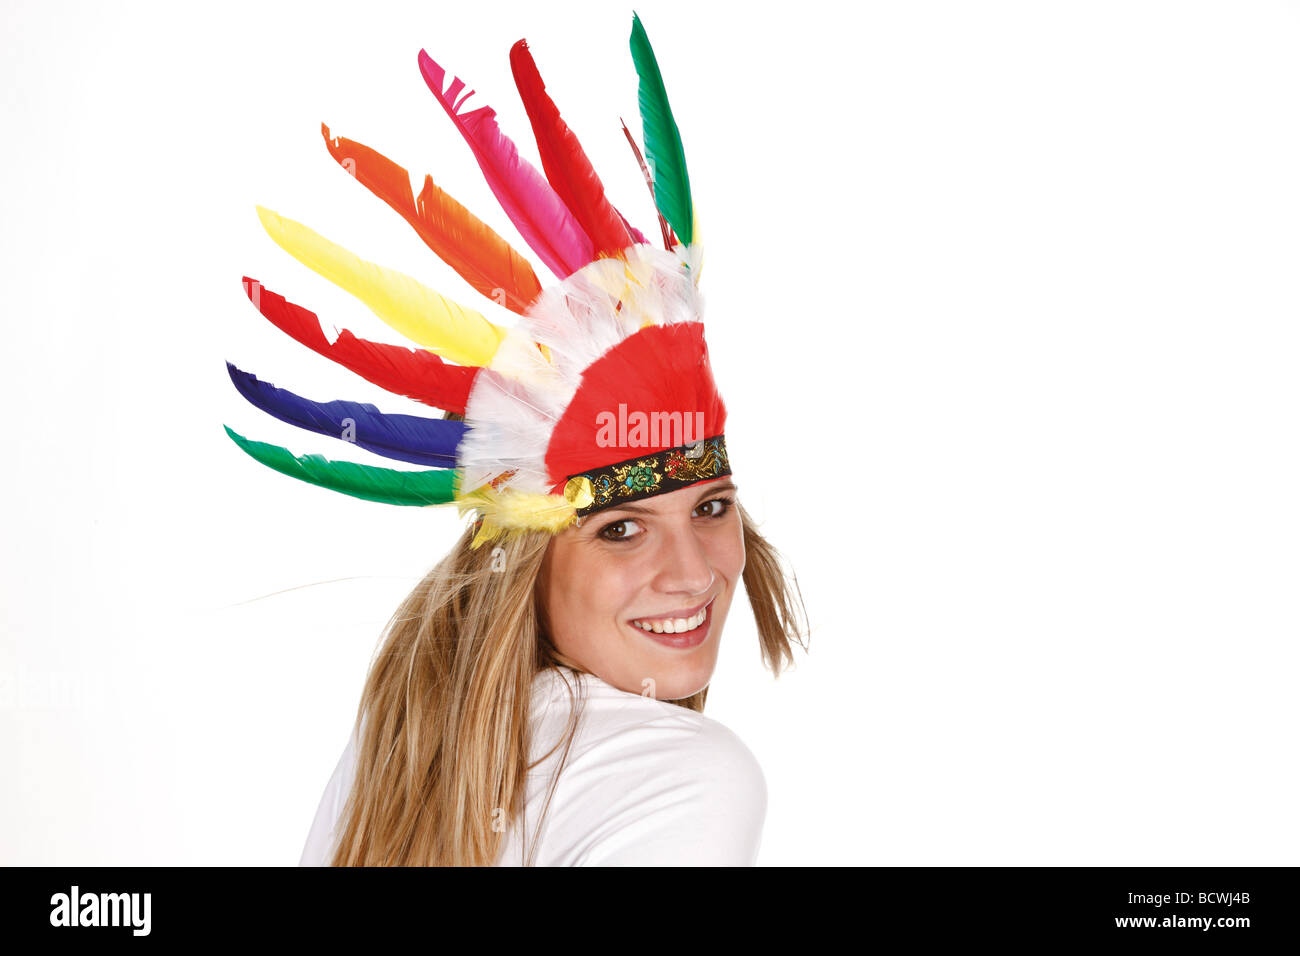 Young woman with carnival headdress, Indian feathers Stock Photo